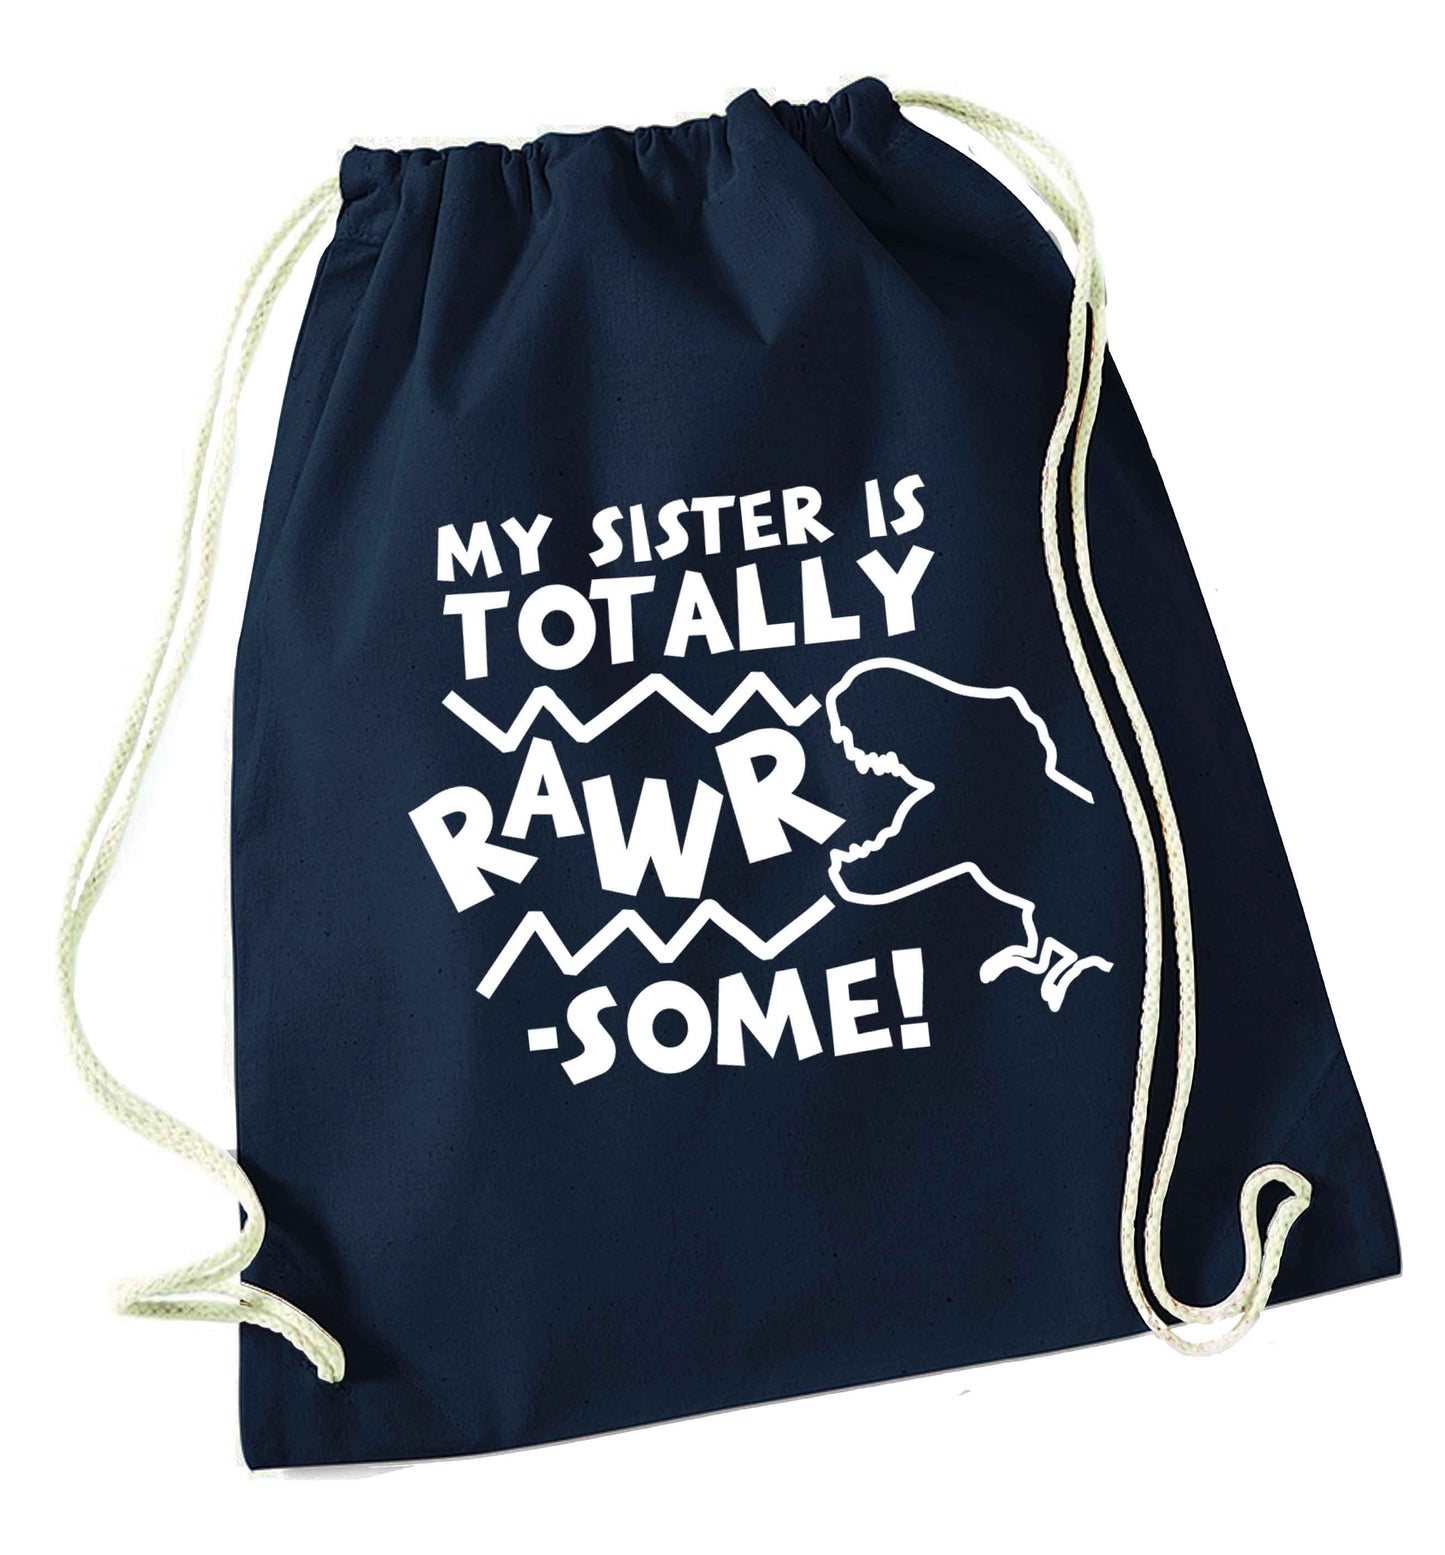 My sister is totally rawrsome navy drawstring bag